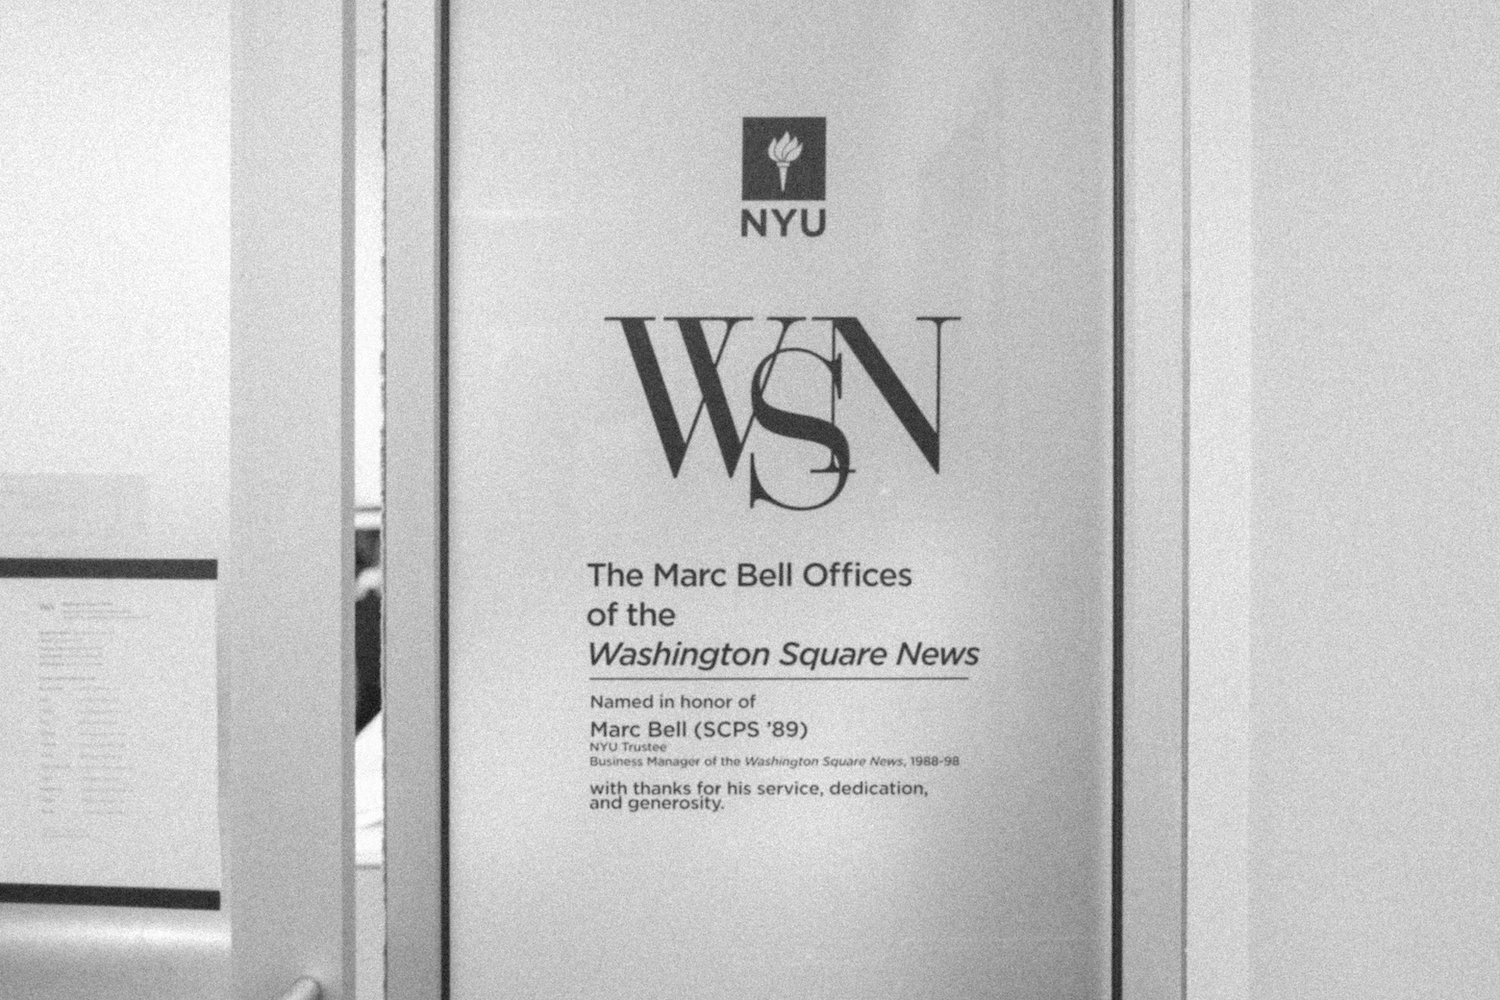 Words imprinted on the office front door that reads “N.Y.U. W.S.N. The Marc Bell Offices of the Washington Square News”